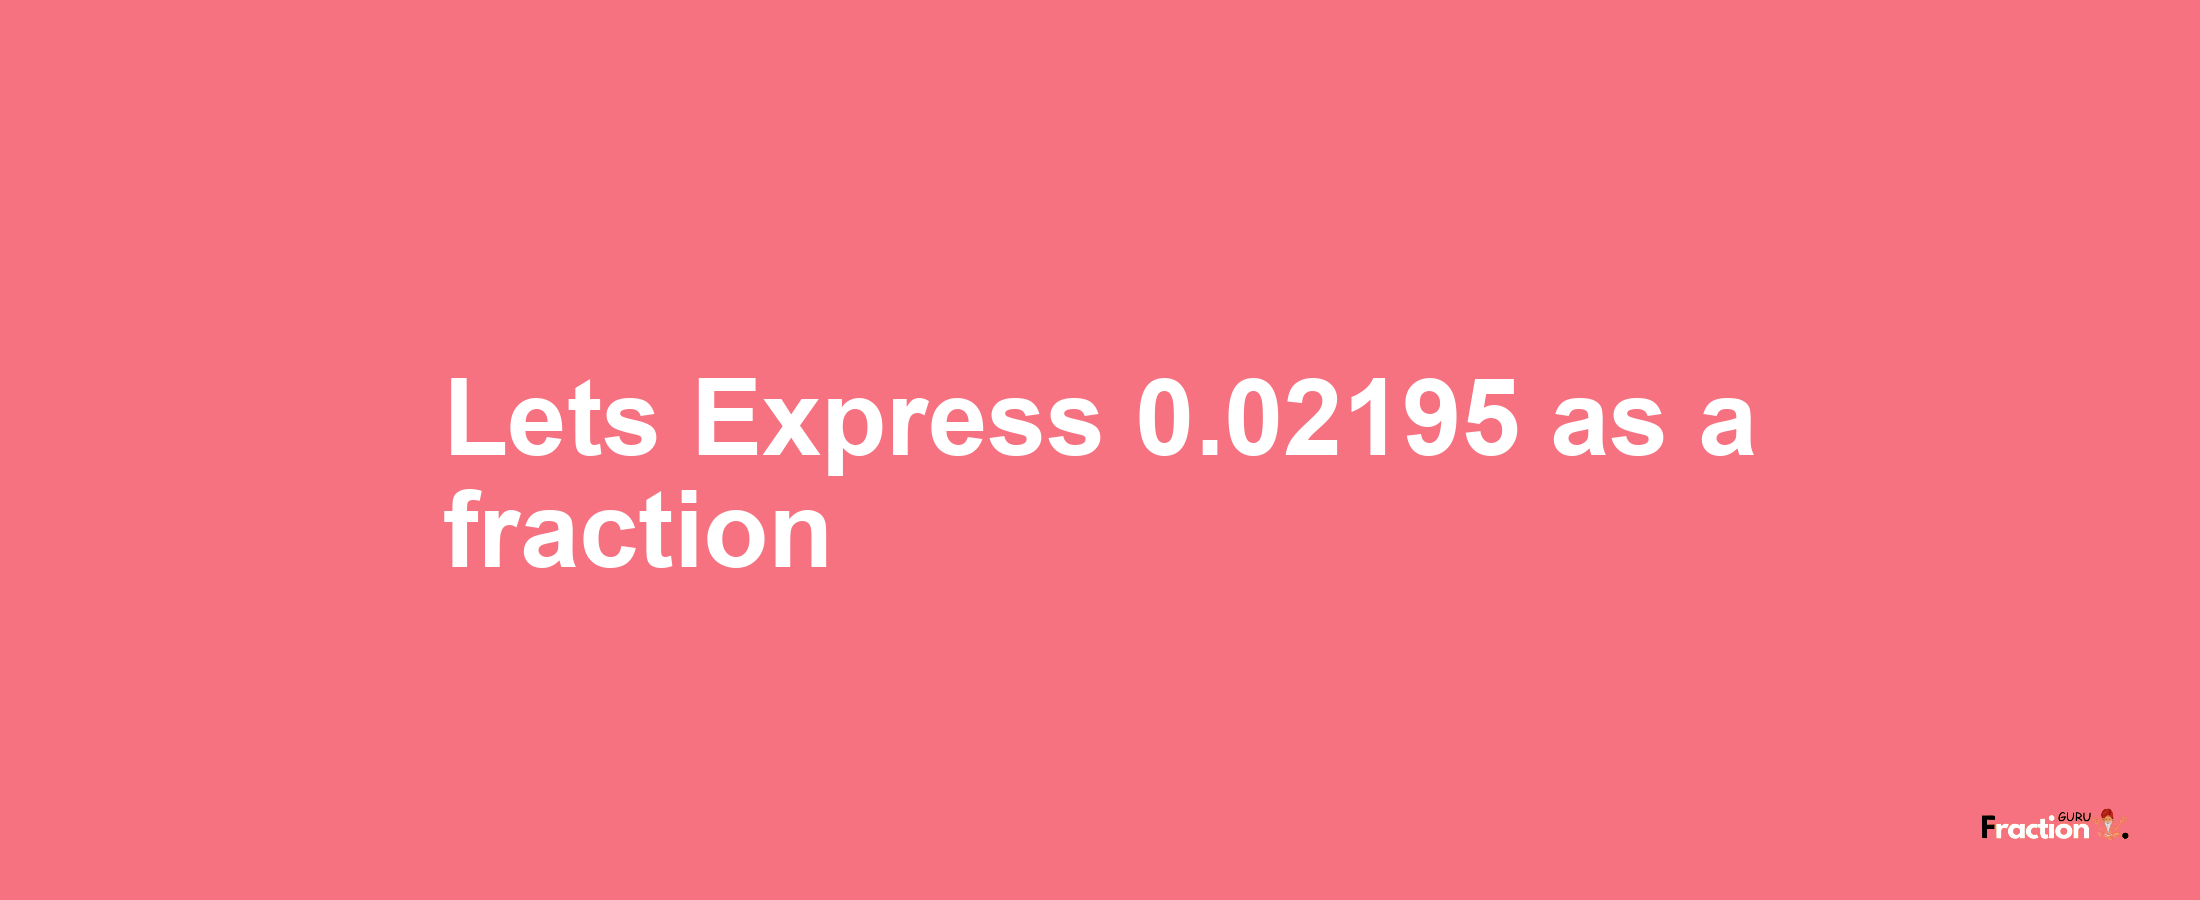 Lets Express 0.02195 as afraction